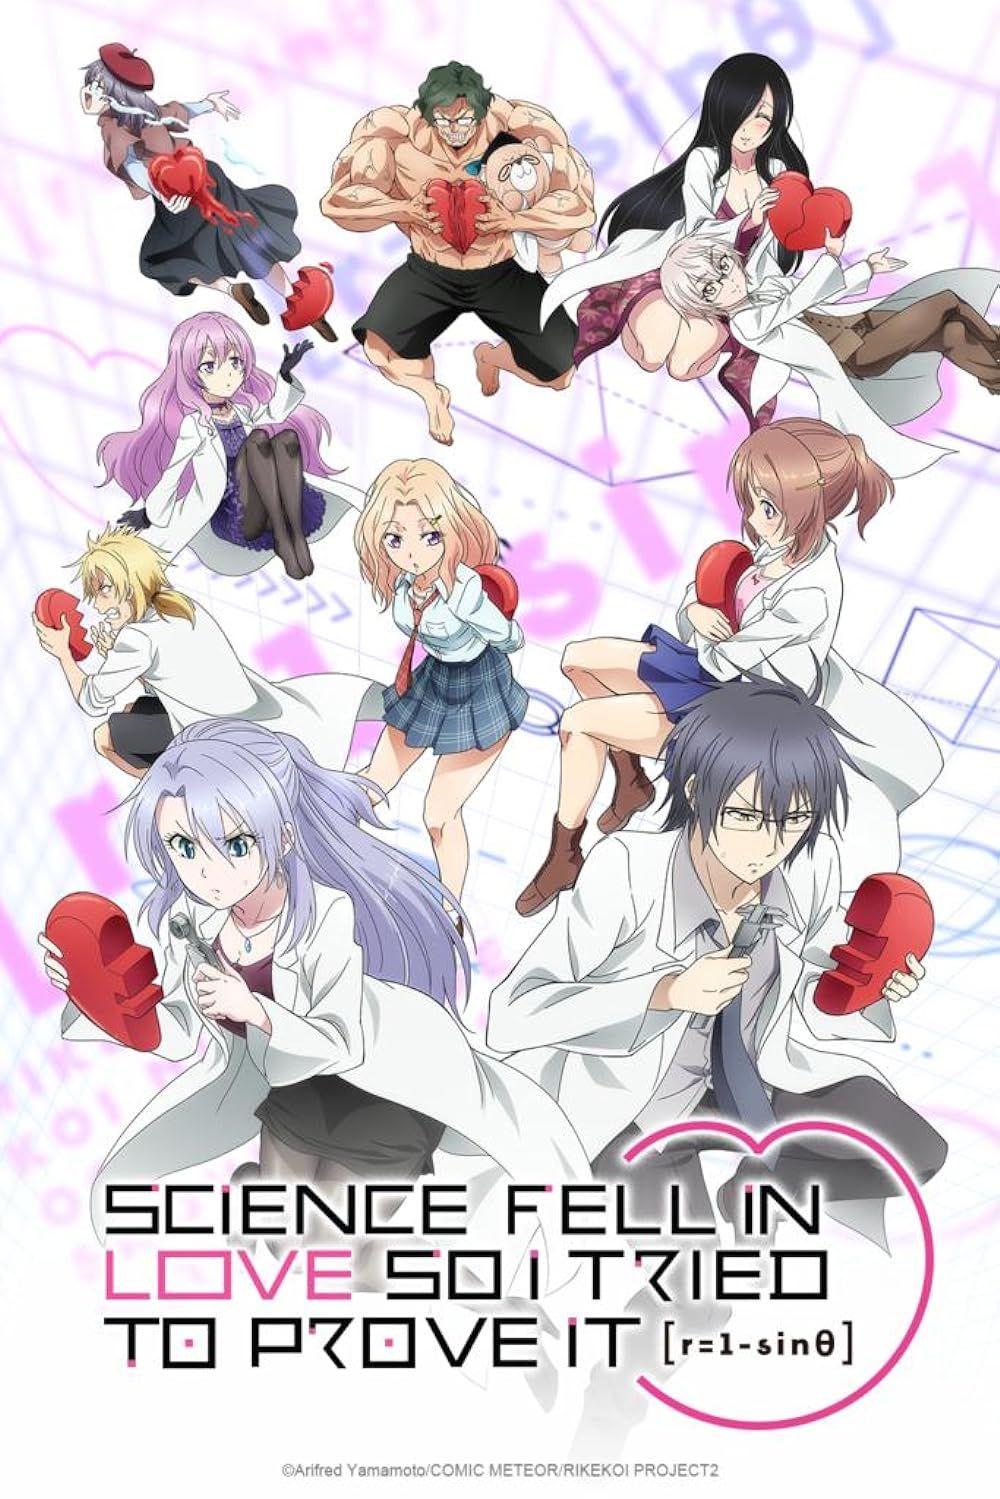 The Cast of Science Fell in Love, So I Tried to Prove It Hold Their Metaphorical Hearts